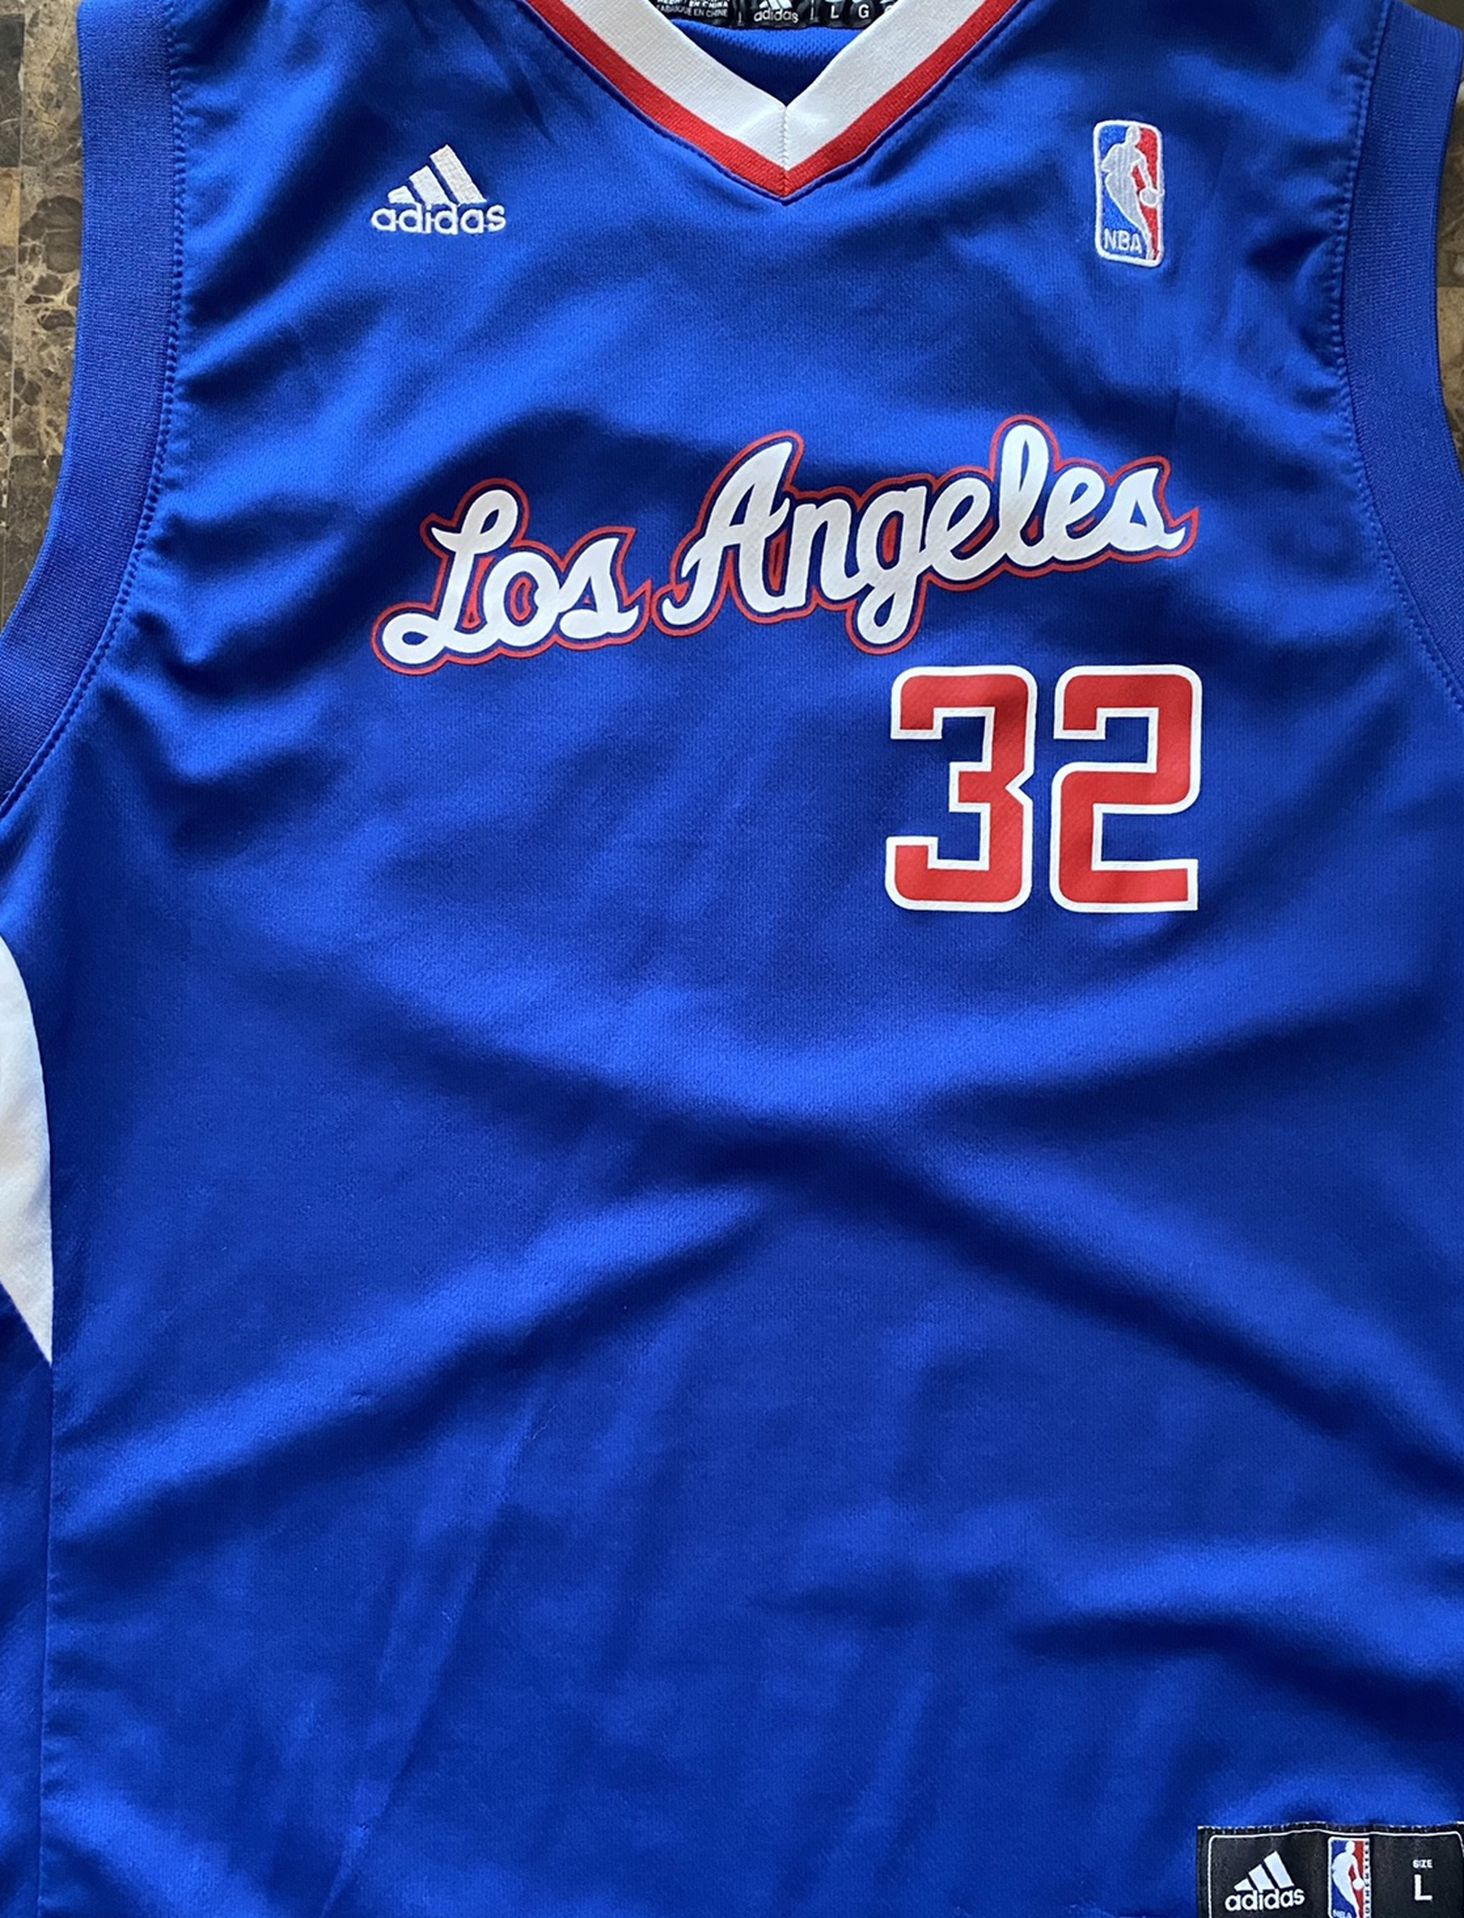 Adidas Los Angeles Clippers NBA Blake Griffin White #32 Jersey